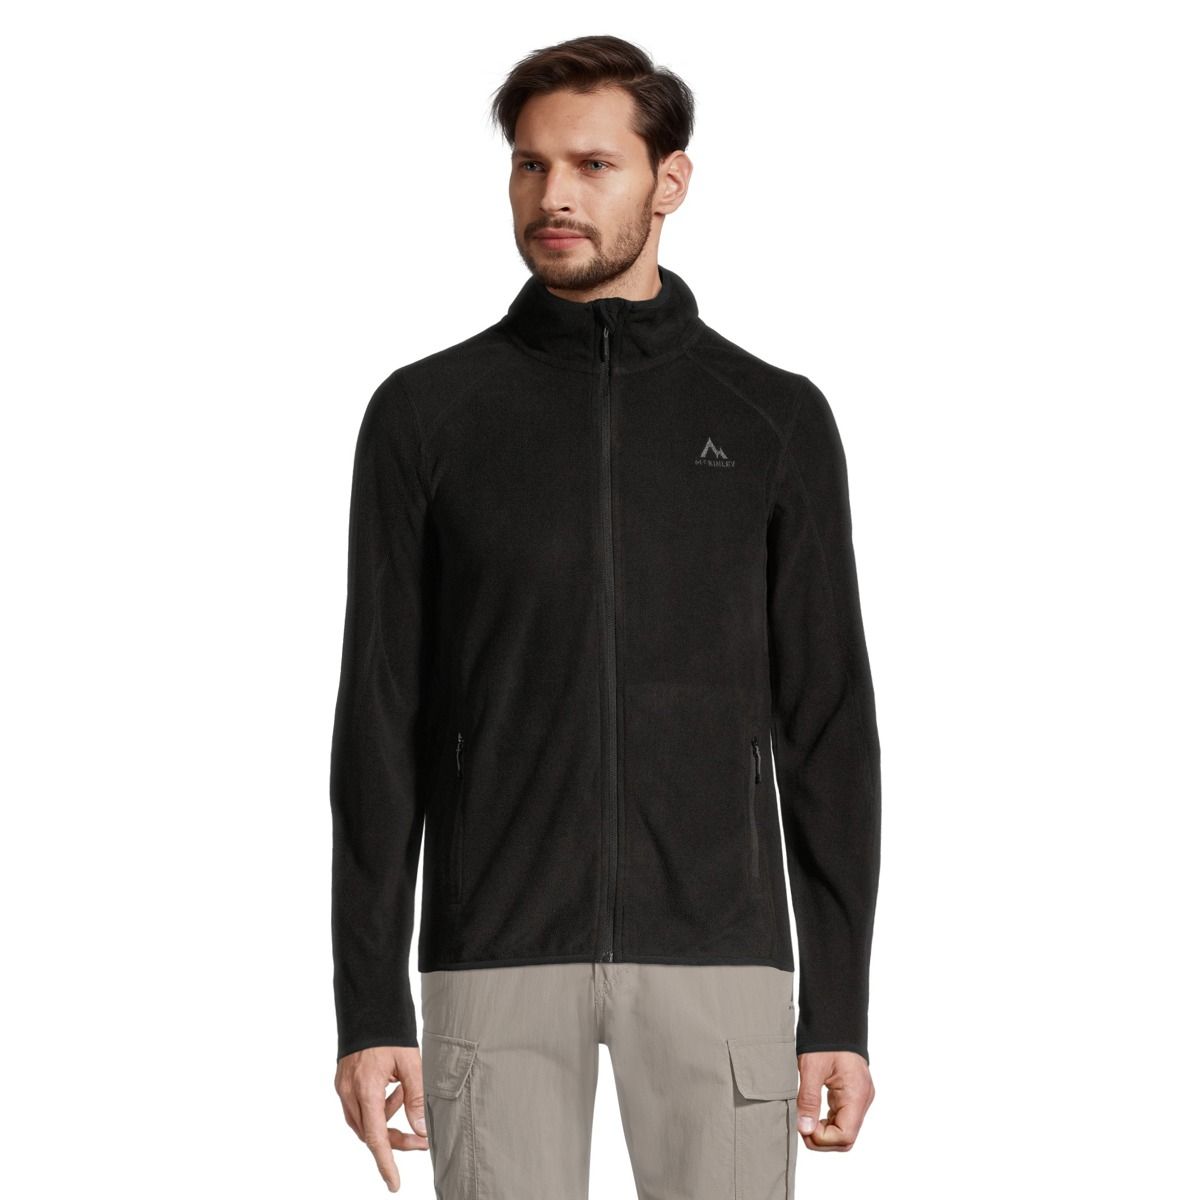 https://media-www.sportchek.ca/product/div-03-softgoods/dpt-72-casual-clothing/sdpt-01-mens/333557763/mckinley-m-atula-iv-microfleece-baded143-b944-4476-9bb9-21a5077dc256-jpgrendition.jpg